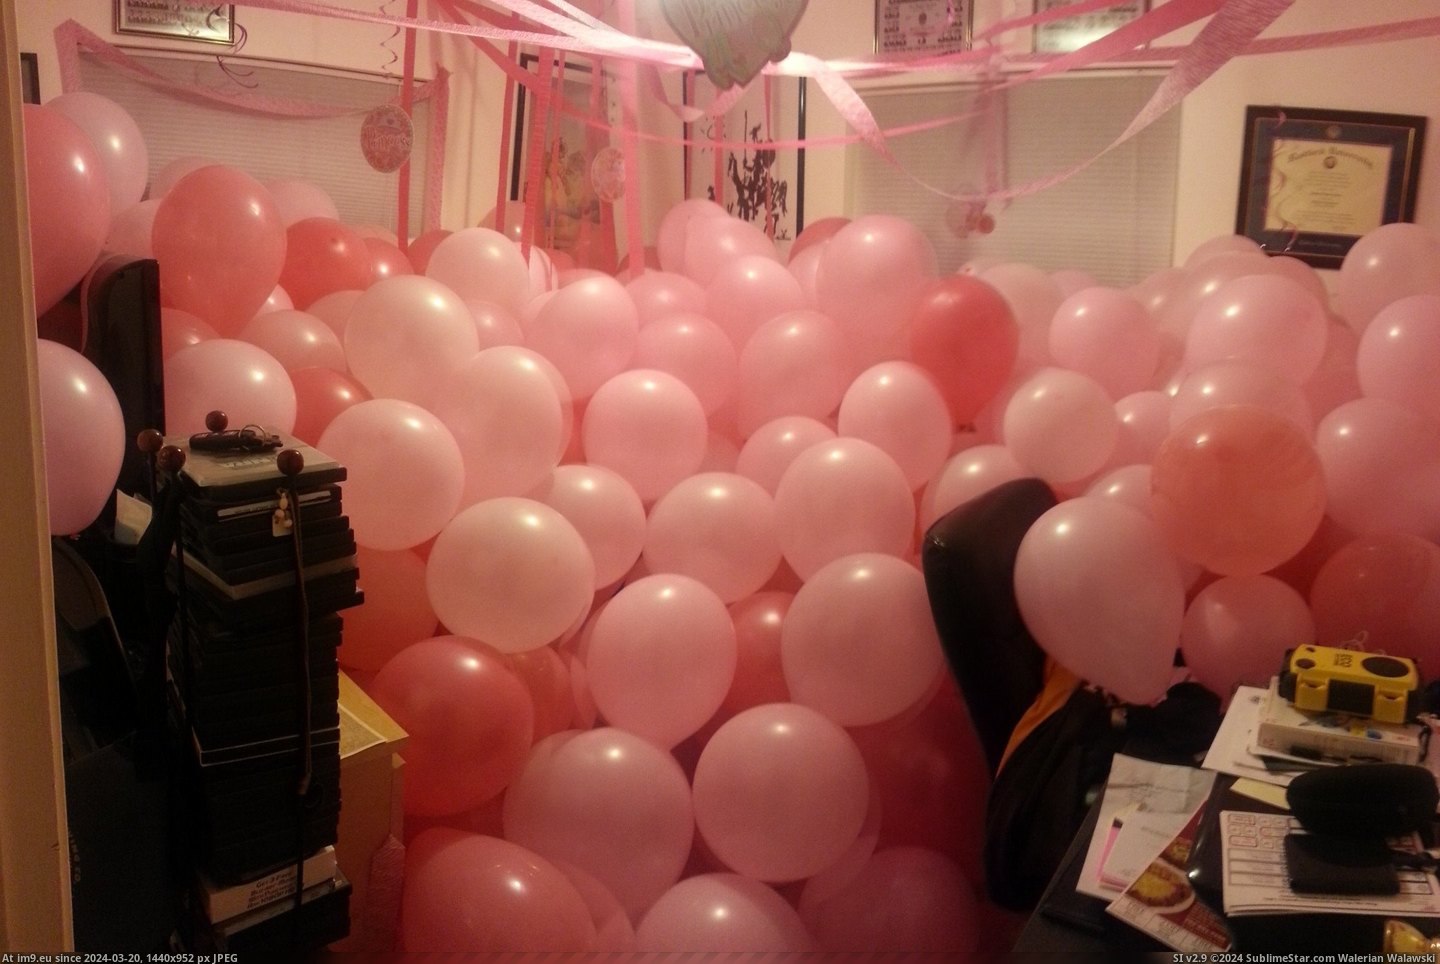 #Funny #One #Out #Roommate #Balloons #Revenge #Room #Got #Town [Funny] My roommate went out of town and came back to 400 balloons in his room. He recently got his revenge when the other one l Pic. (Bild von album My r/FUNNY favs))